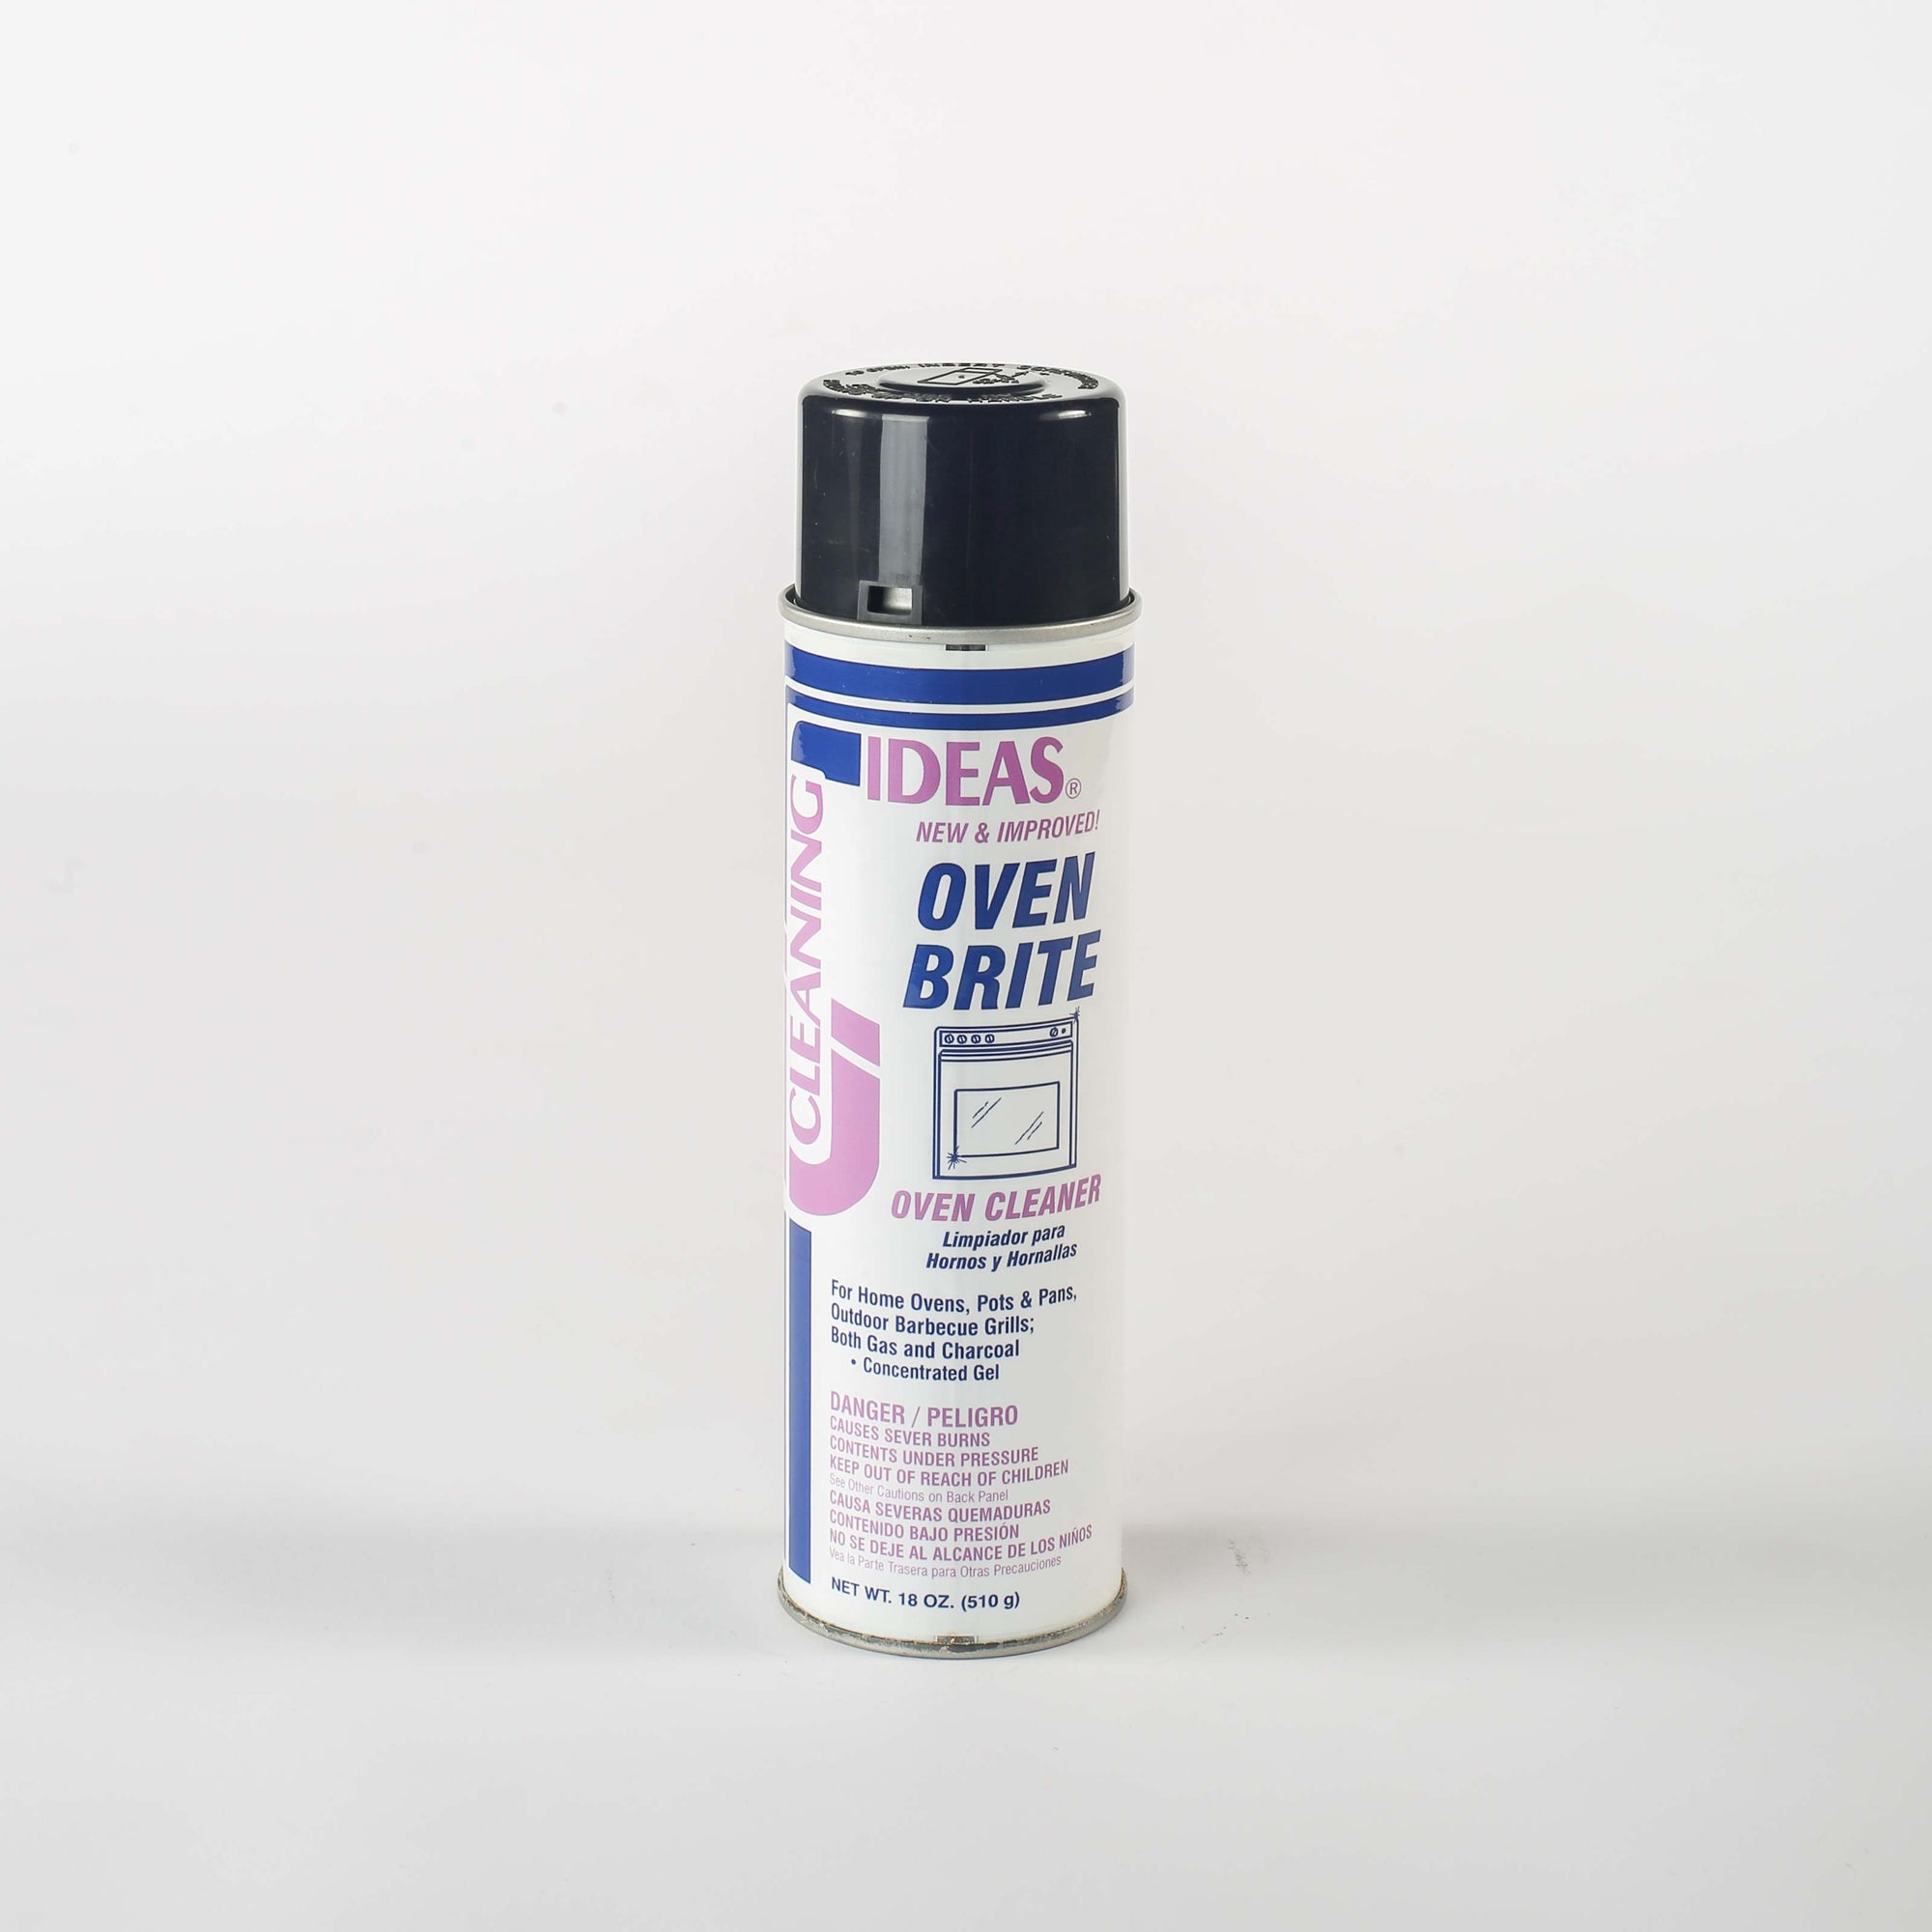 Oven Brite Oven Cleaner - Cleaning Ideas 